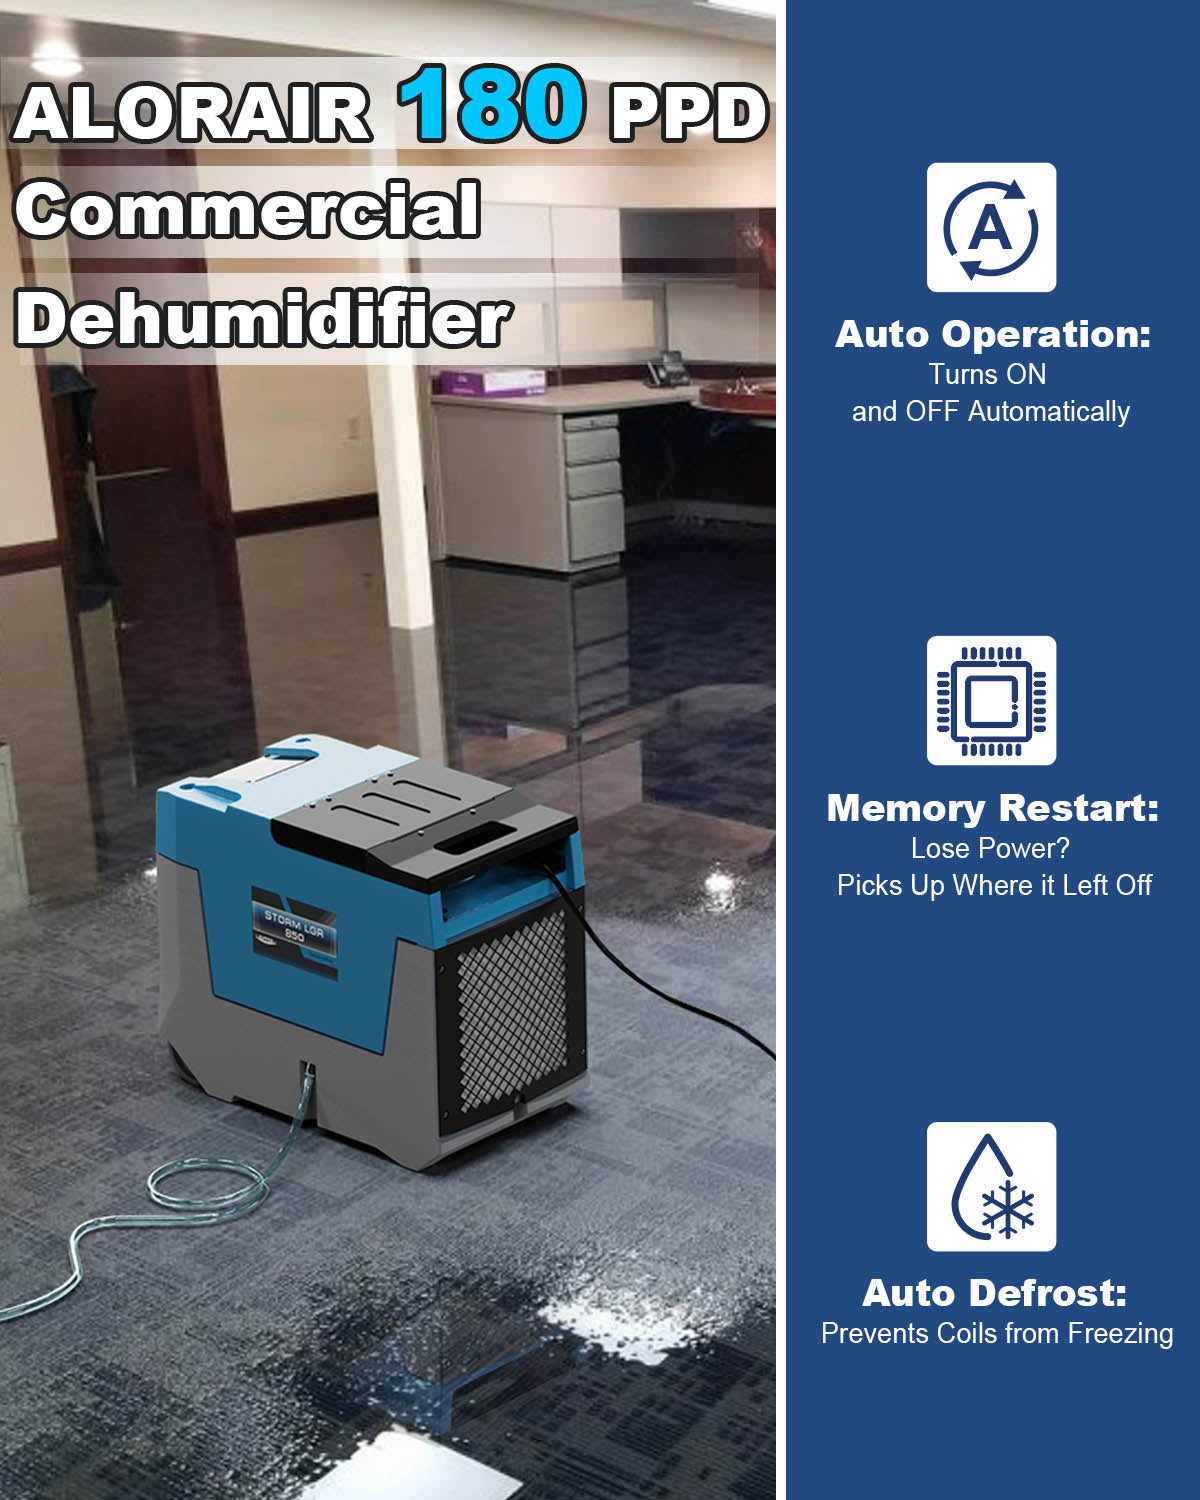 AlorAir 180 PPD Commercial Dehumidifier Storm LGR 850 With Pump, 28 Gallons Heavy Duty Industrial Water Damage Restoration Dehumidifier, Smaller Size, For Homes Basements, Garages, and Job Sites AlorAir